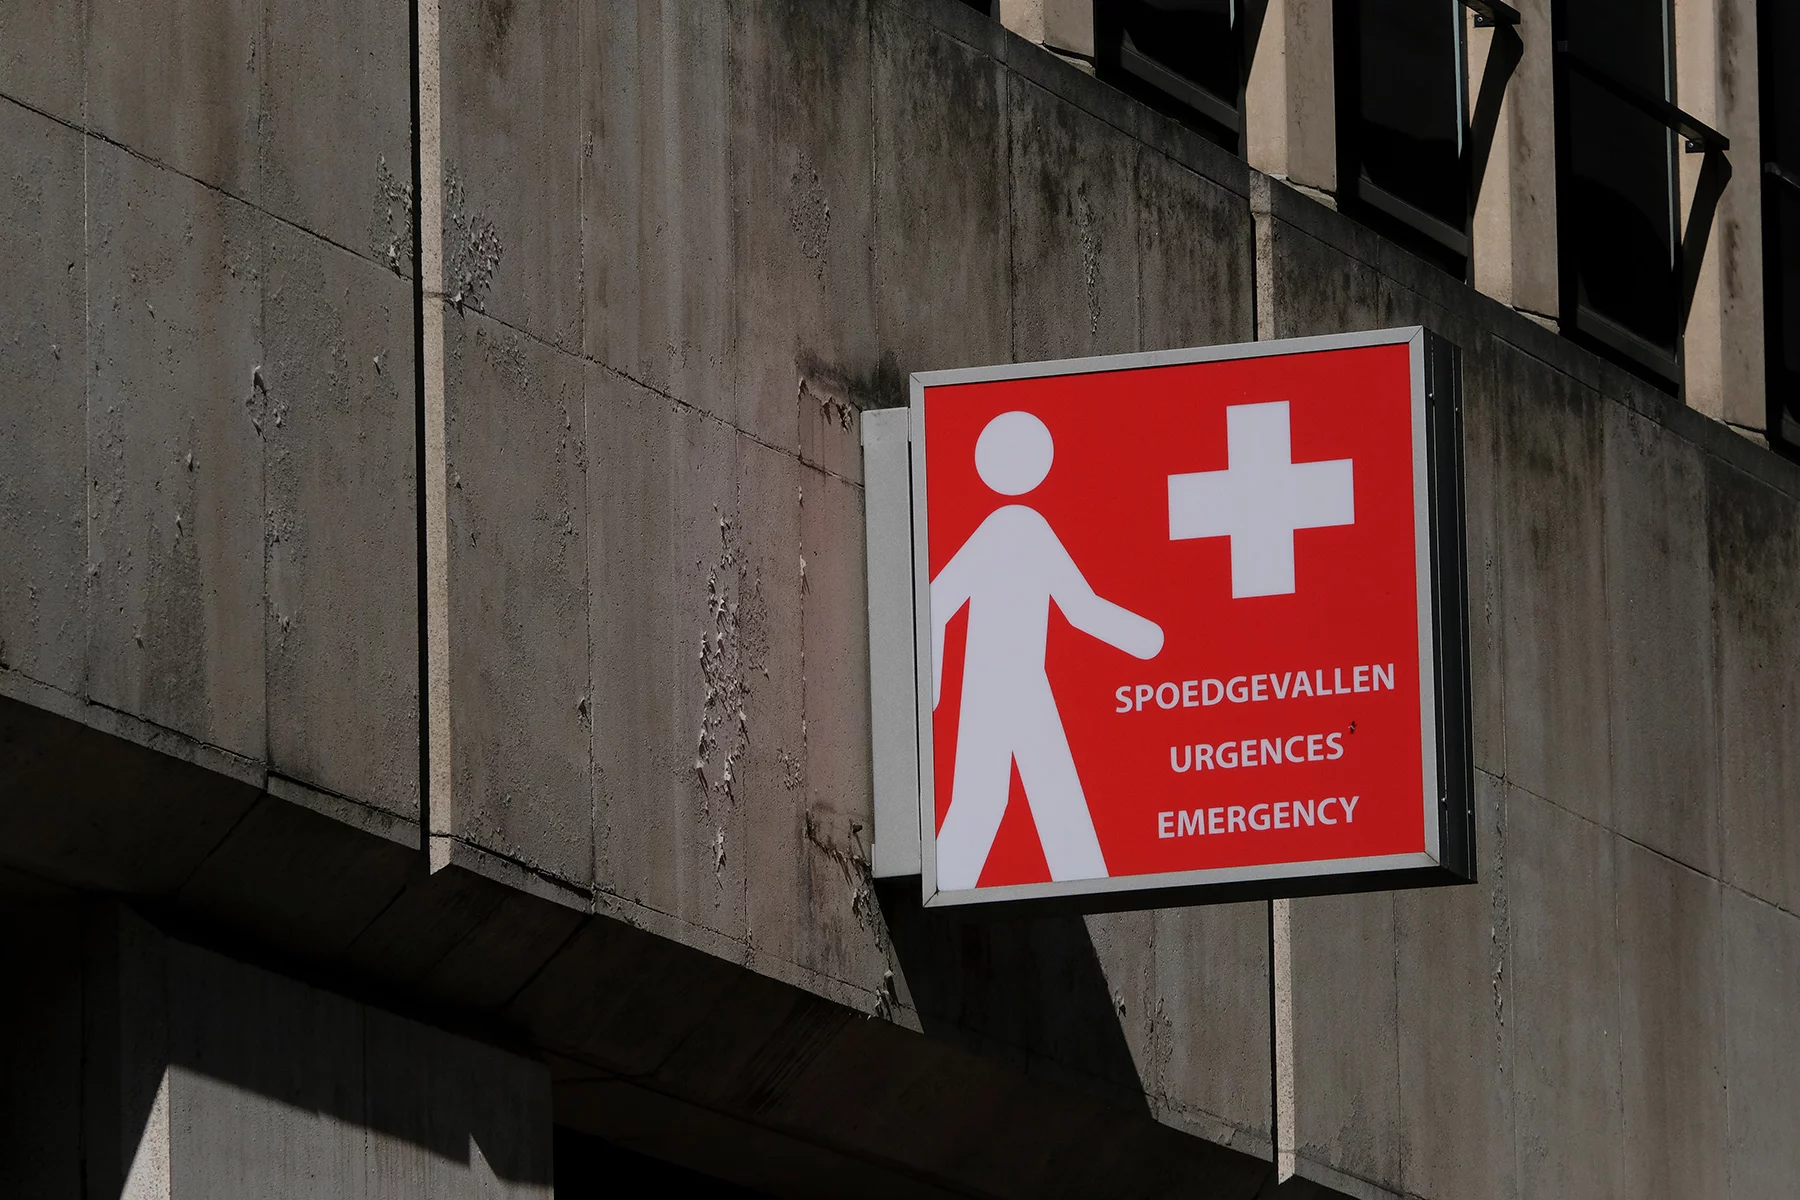 A multilingual sign at the entrance of a hospital in Brussels, Belgium